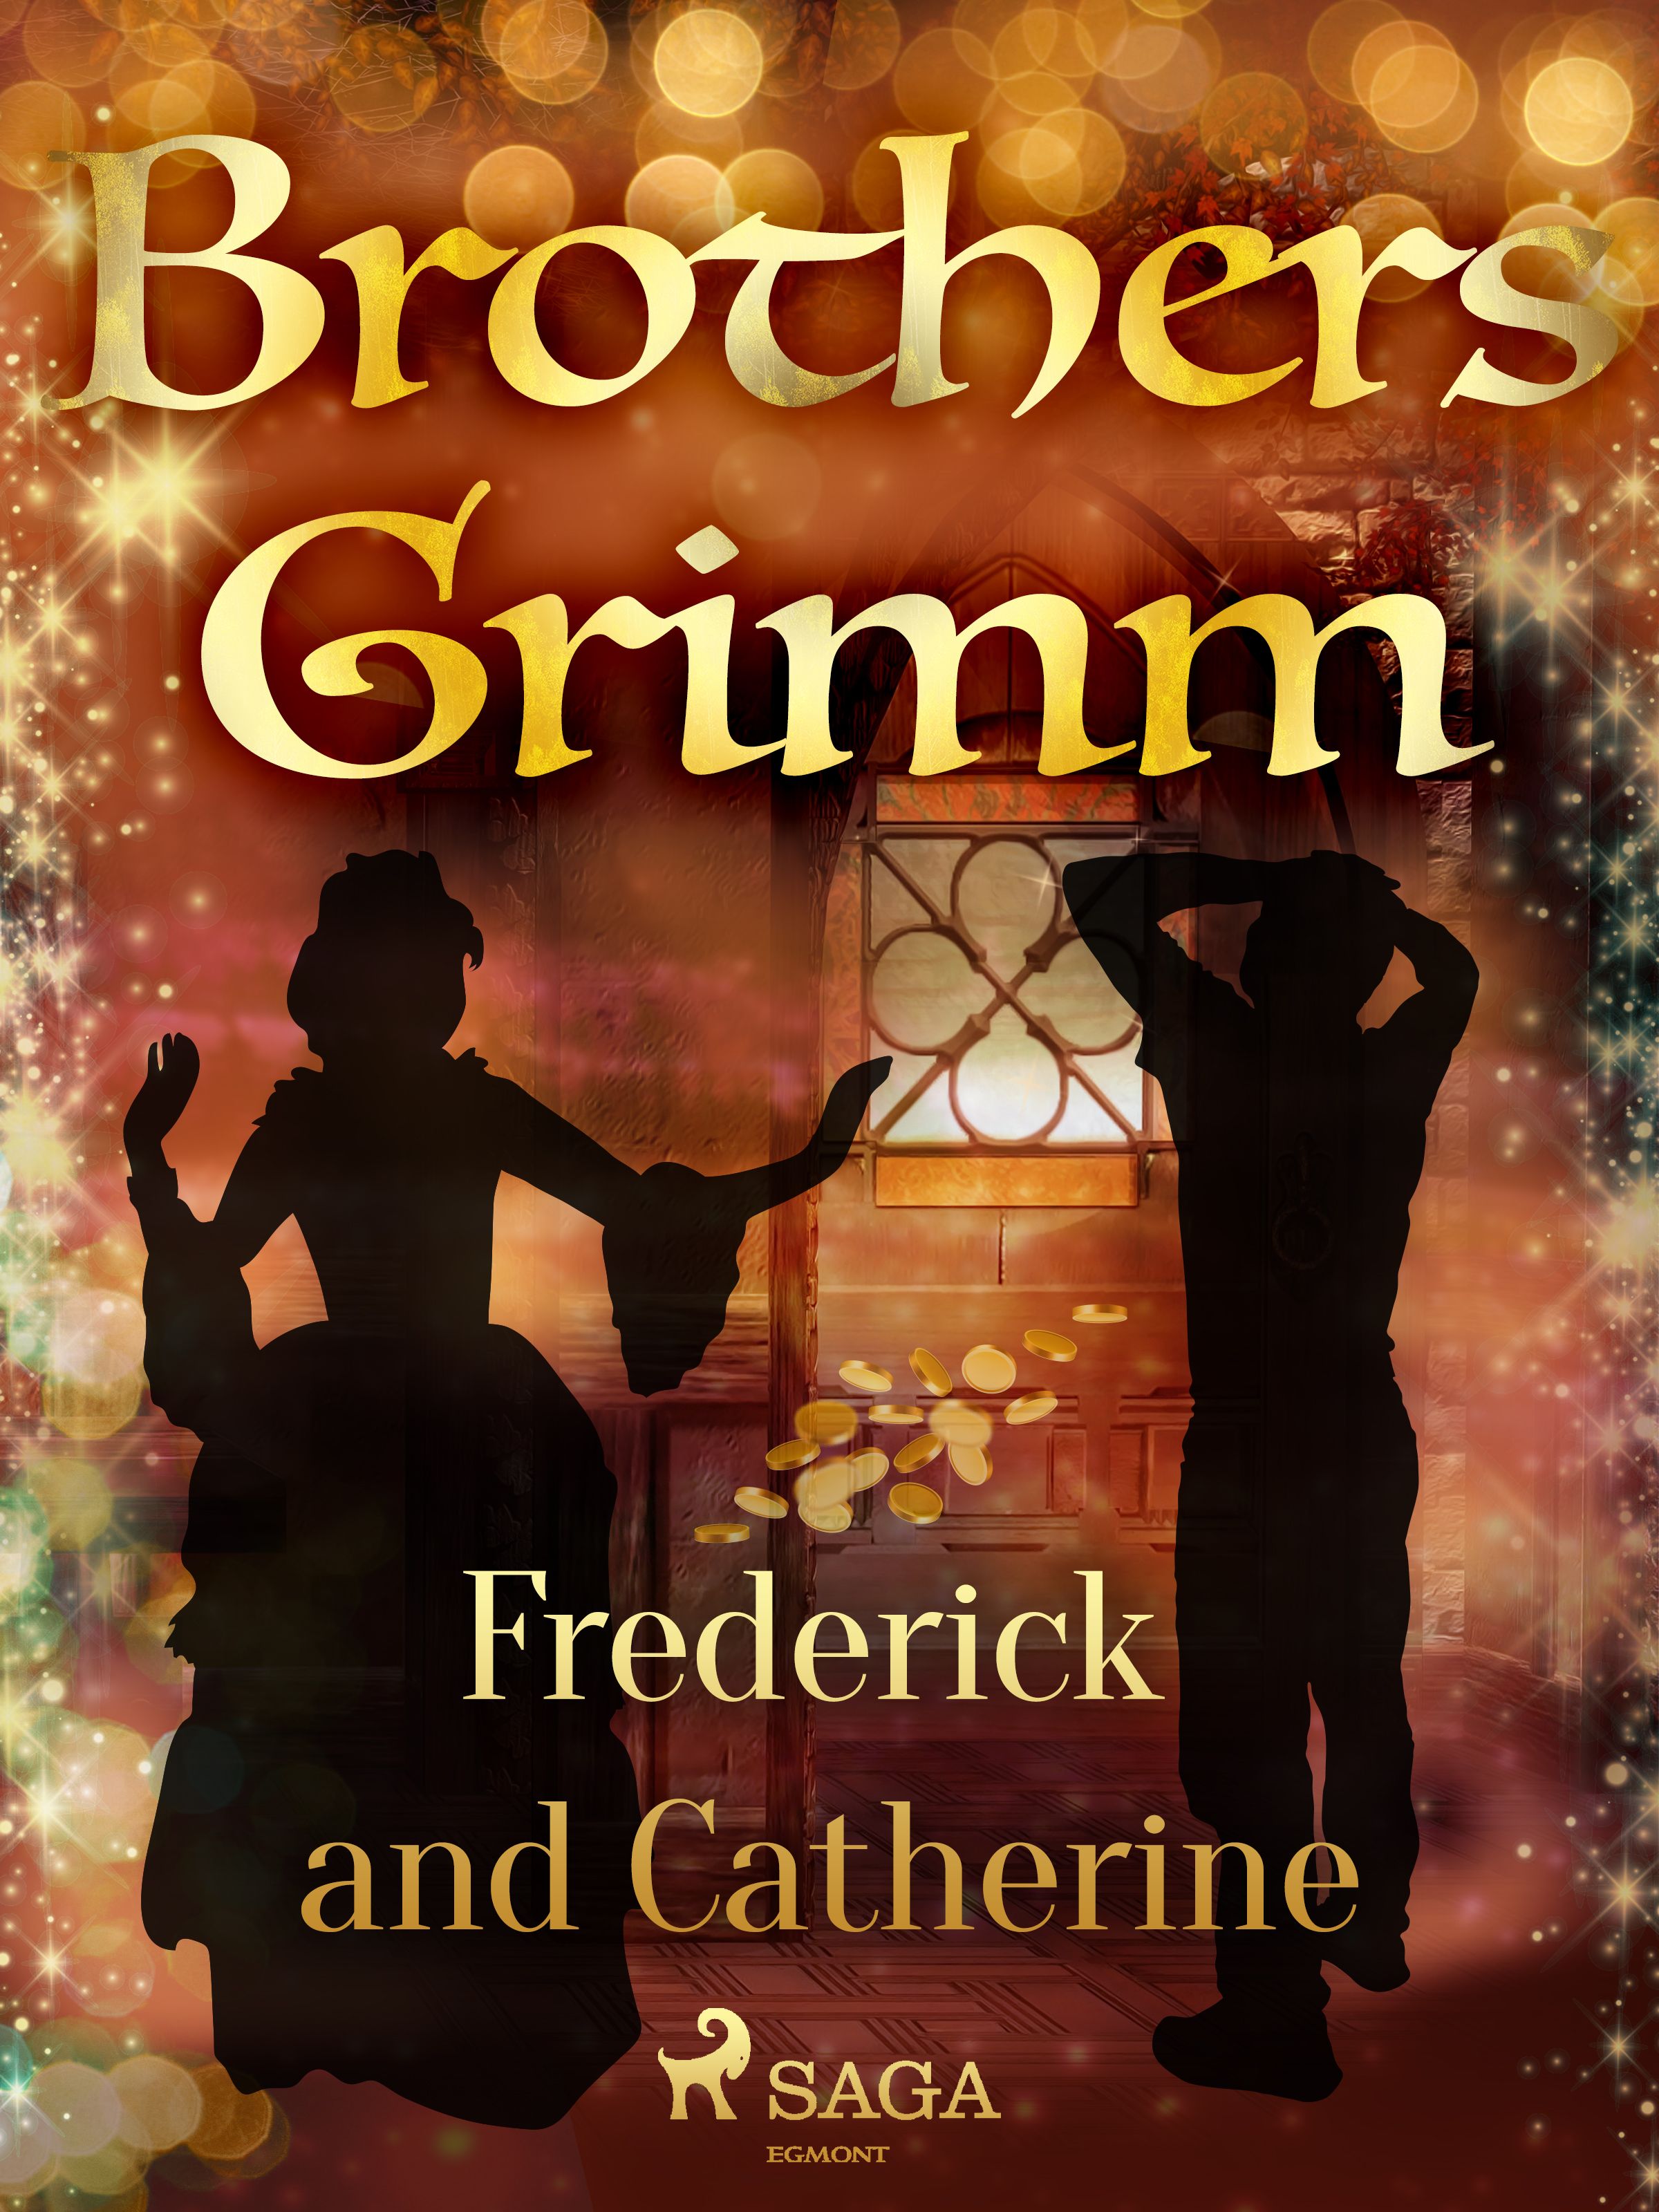 Frederick and Catherine, e-bok av Brothers Grimm